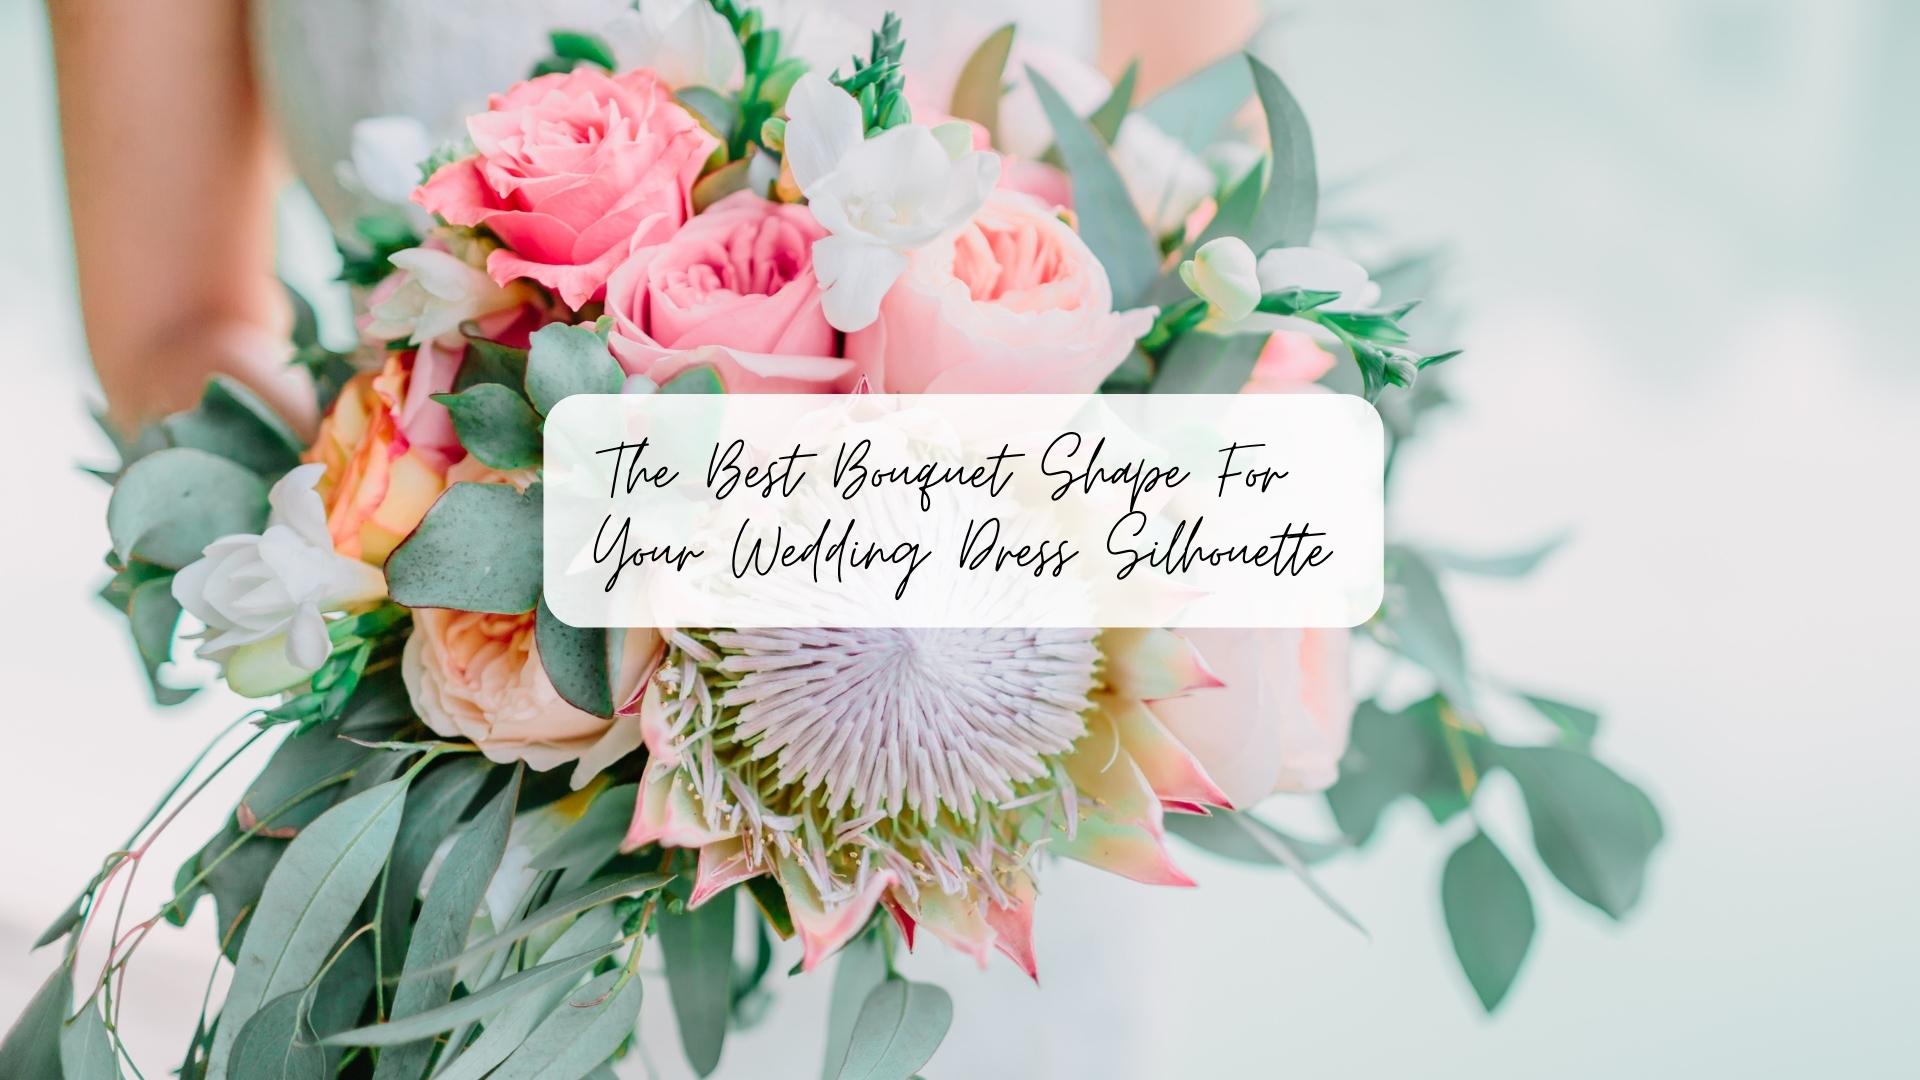 The Best Bouquet Shape for Your Wedding Dress Silhouette